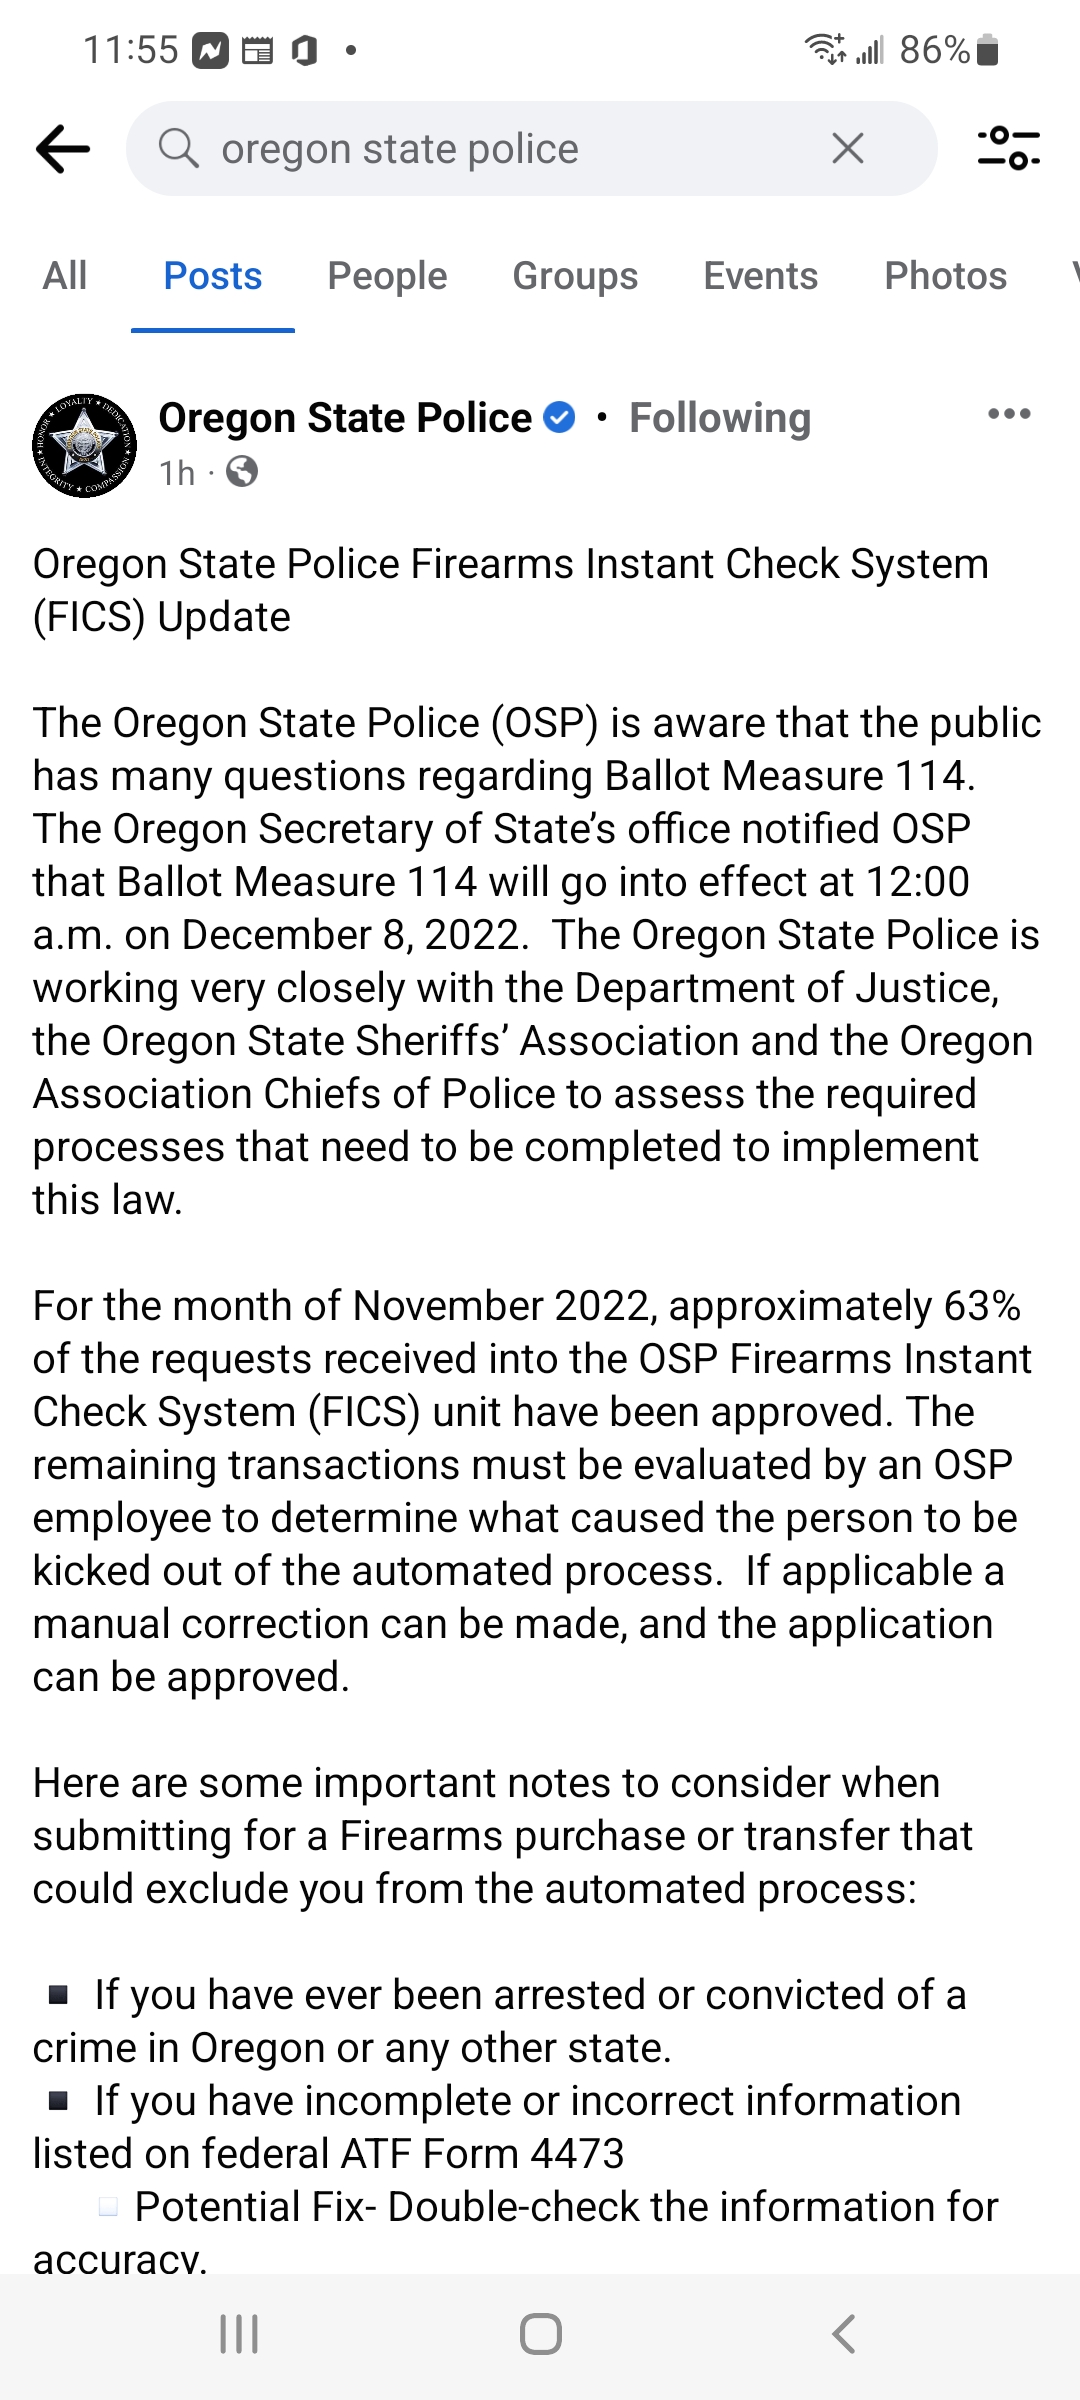 OREGON STATE POLICE FIREARMS INSTANT CHECK SYSTEM (FICS) UPDATE- OREGON